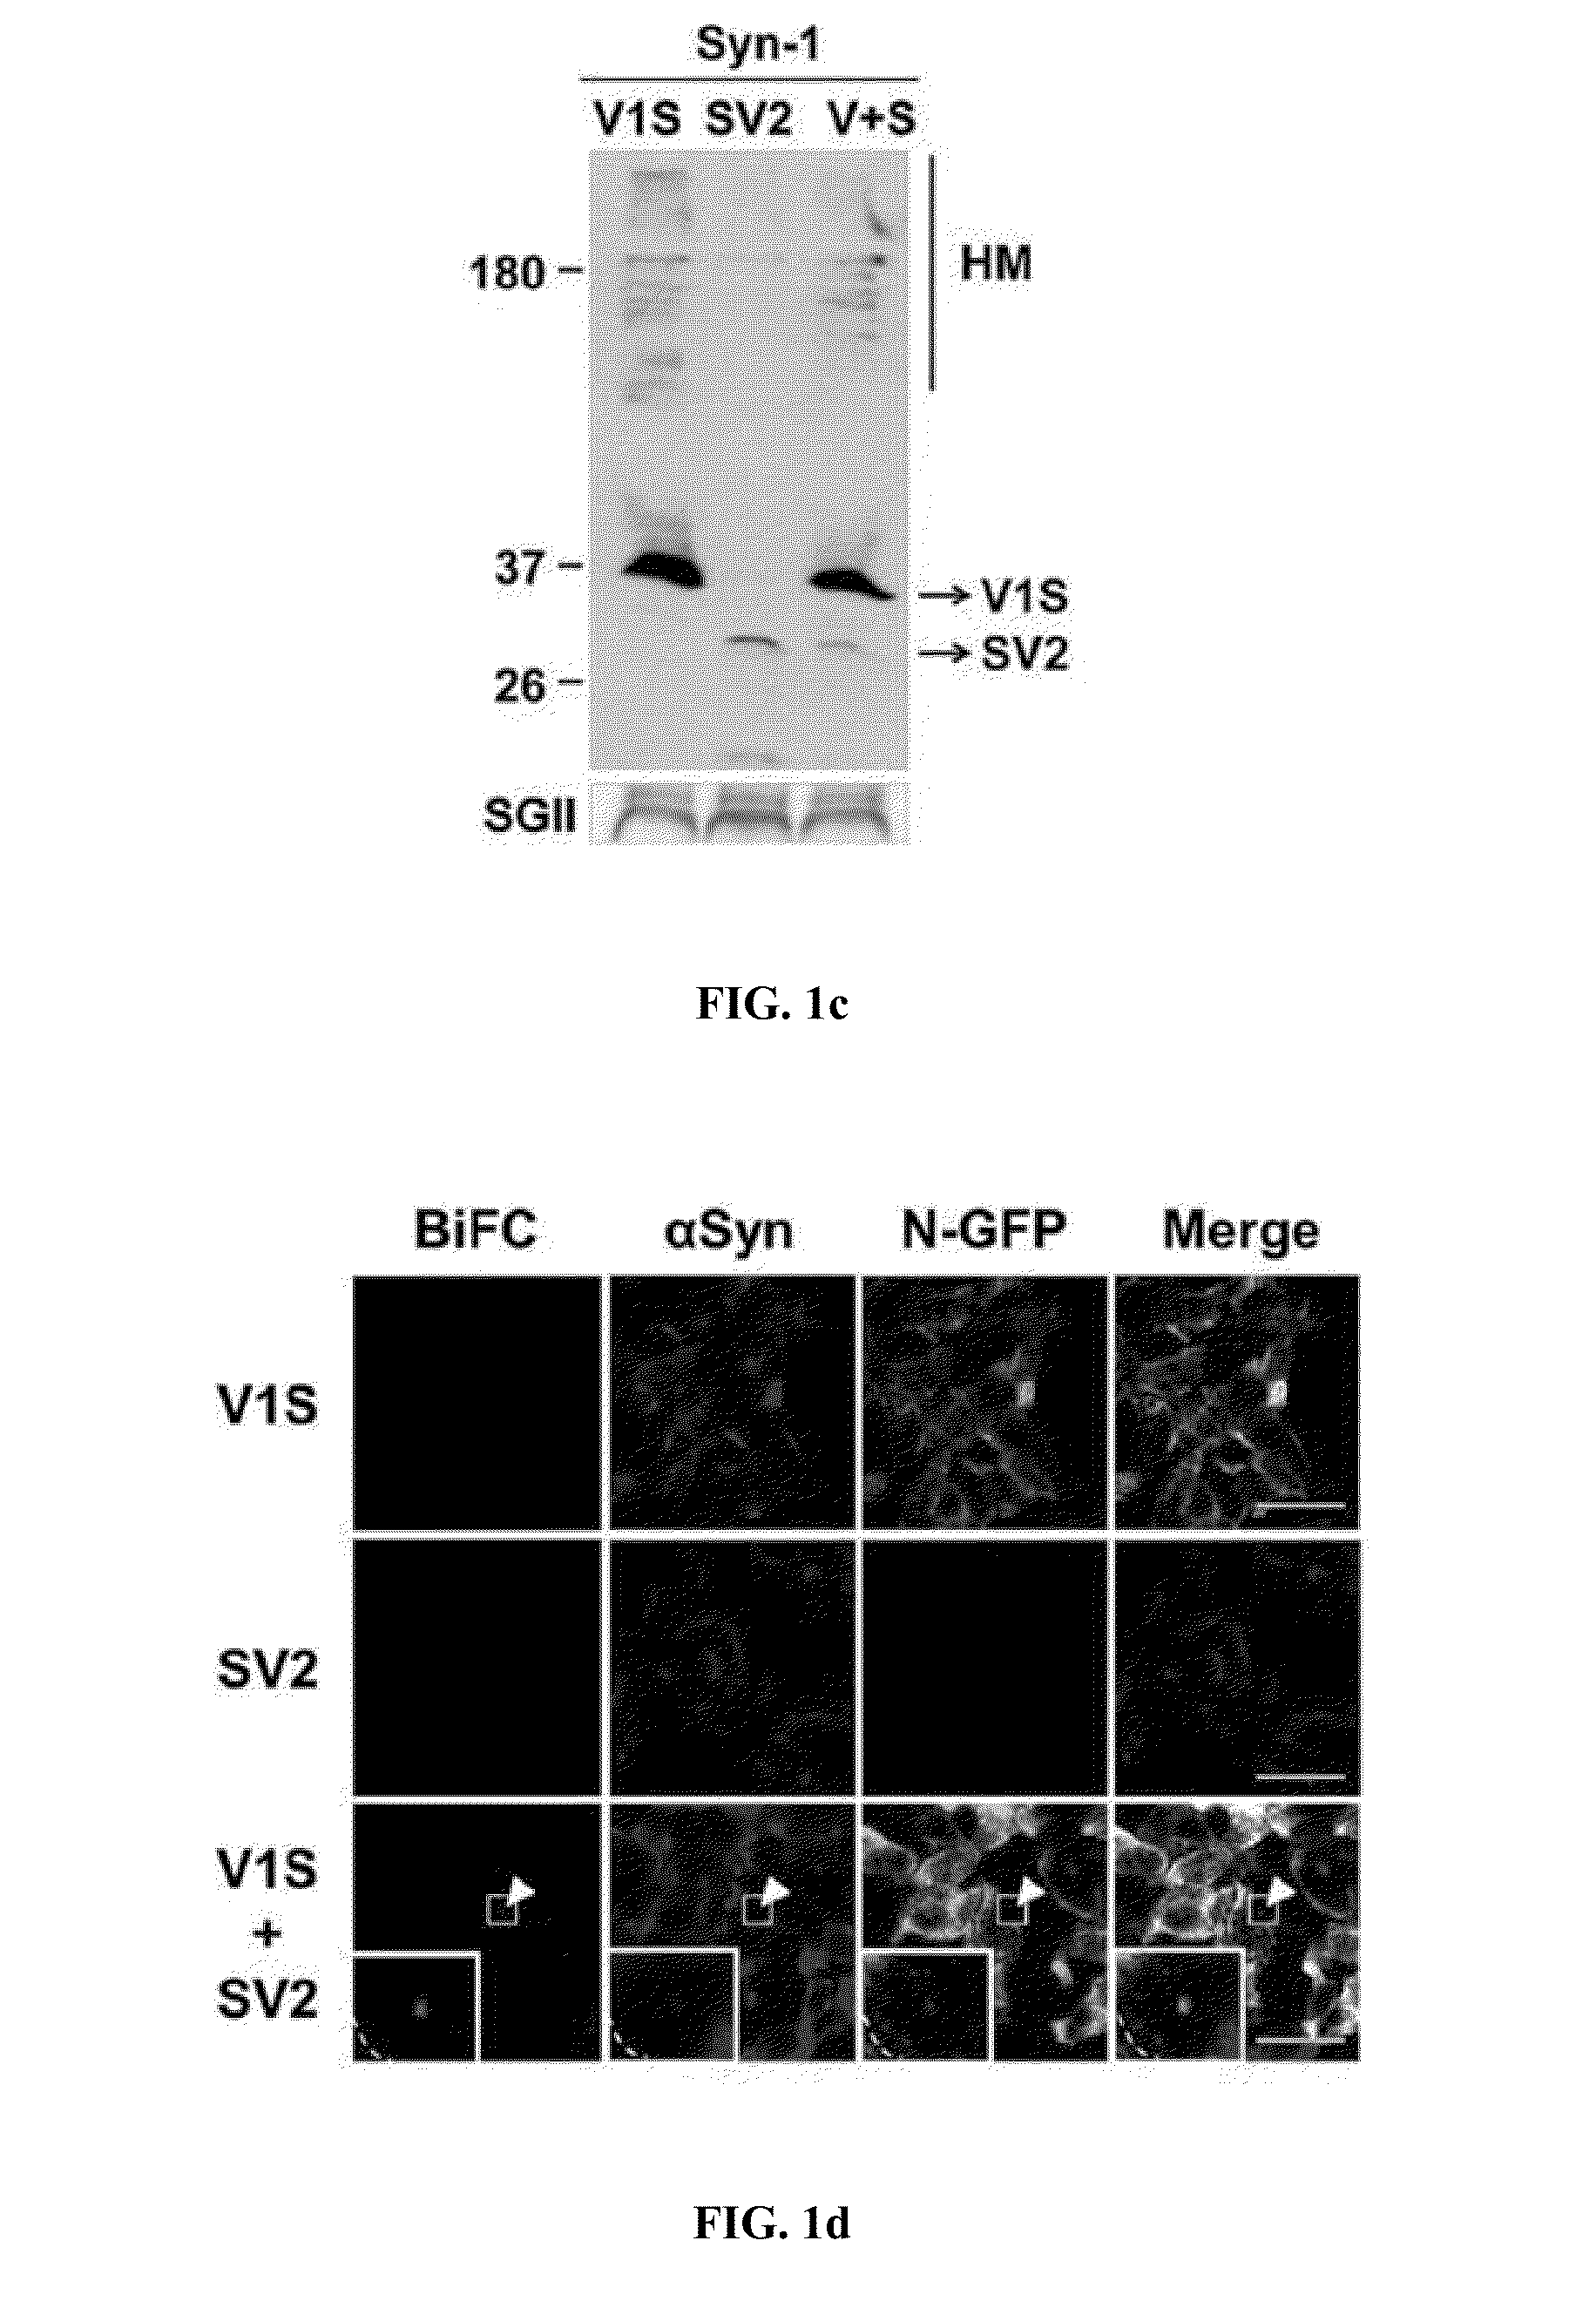 Method for measuring cell-to-cell transmission of alpha-synuclein aggregates using bimolecular fluorescence complementation system and method for screening a substance for preventing or treating neurodegenerative disease using the same